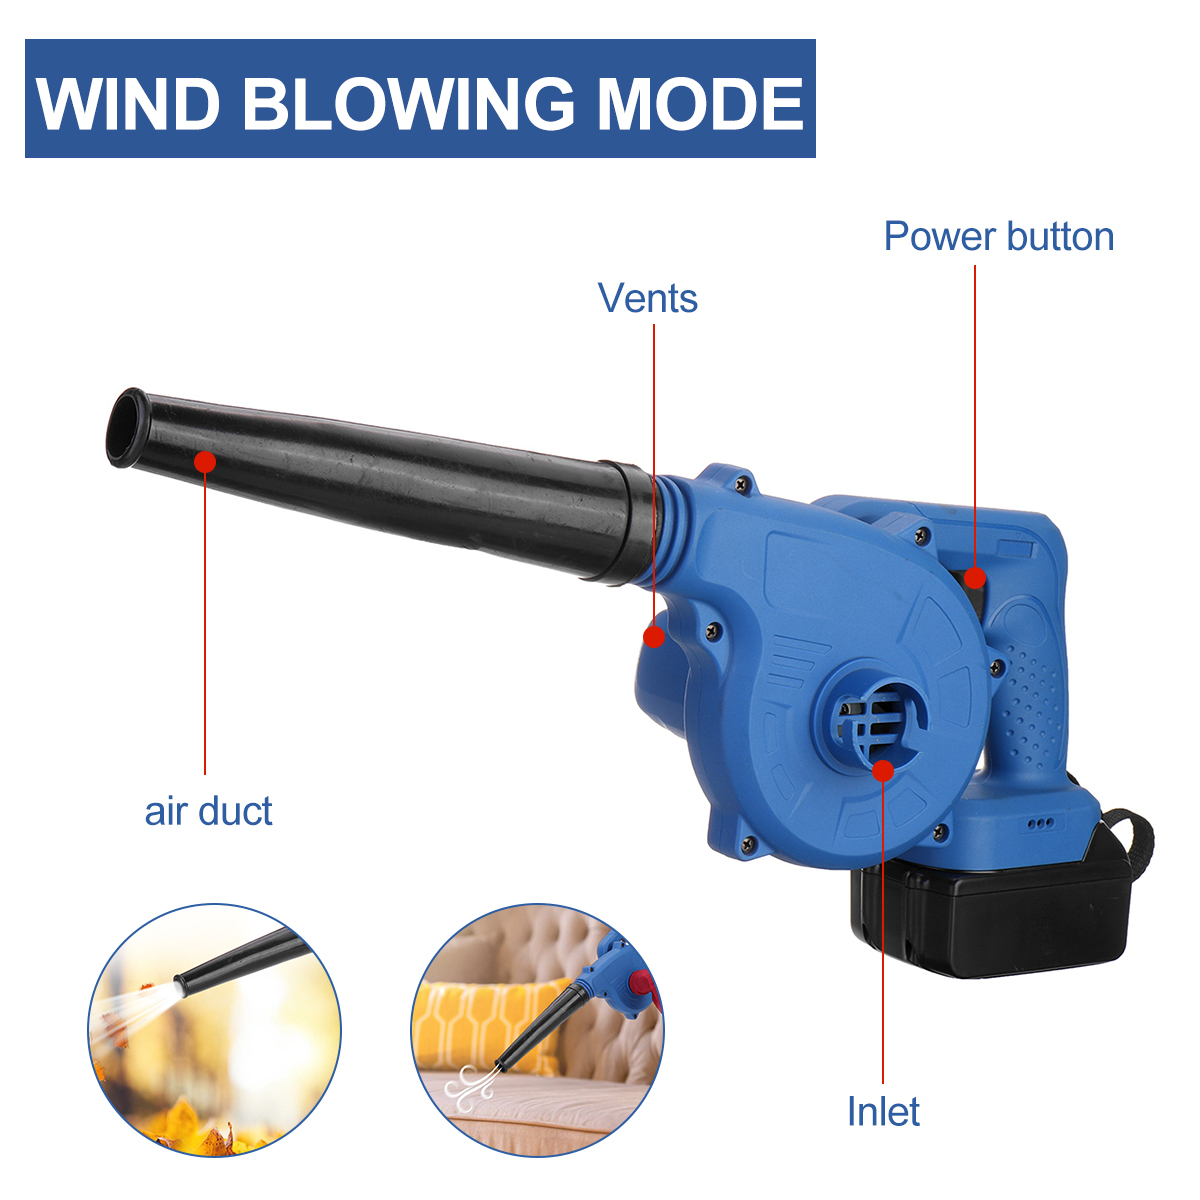 2-IN-1-Electric-Air-Blower-Kit-Cleaner-Wireless-Air-Fan-Dust-Blowing-Computer-Dust-Collector-Adapted-1838499-8